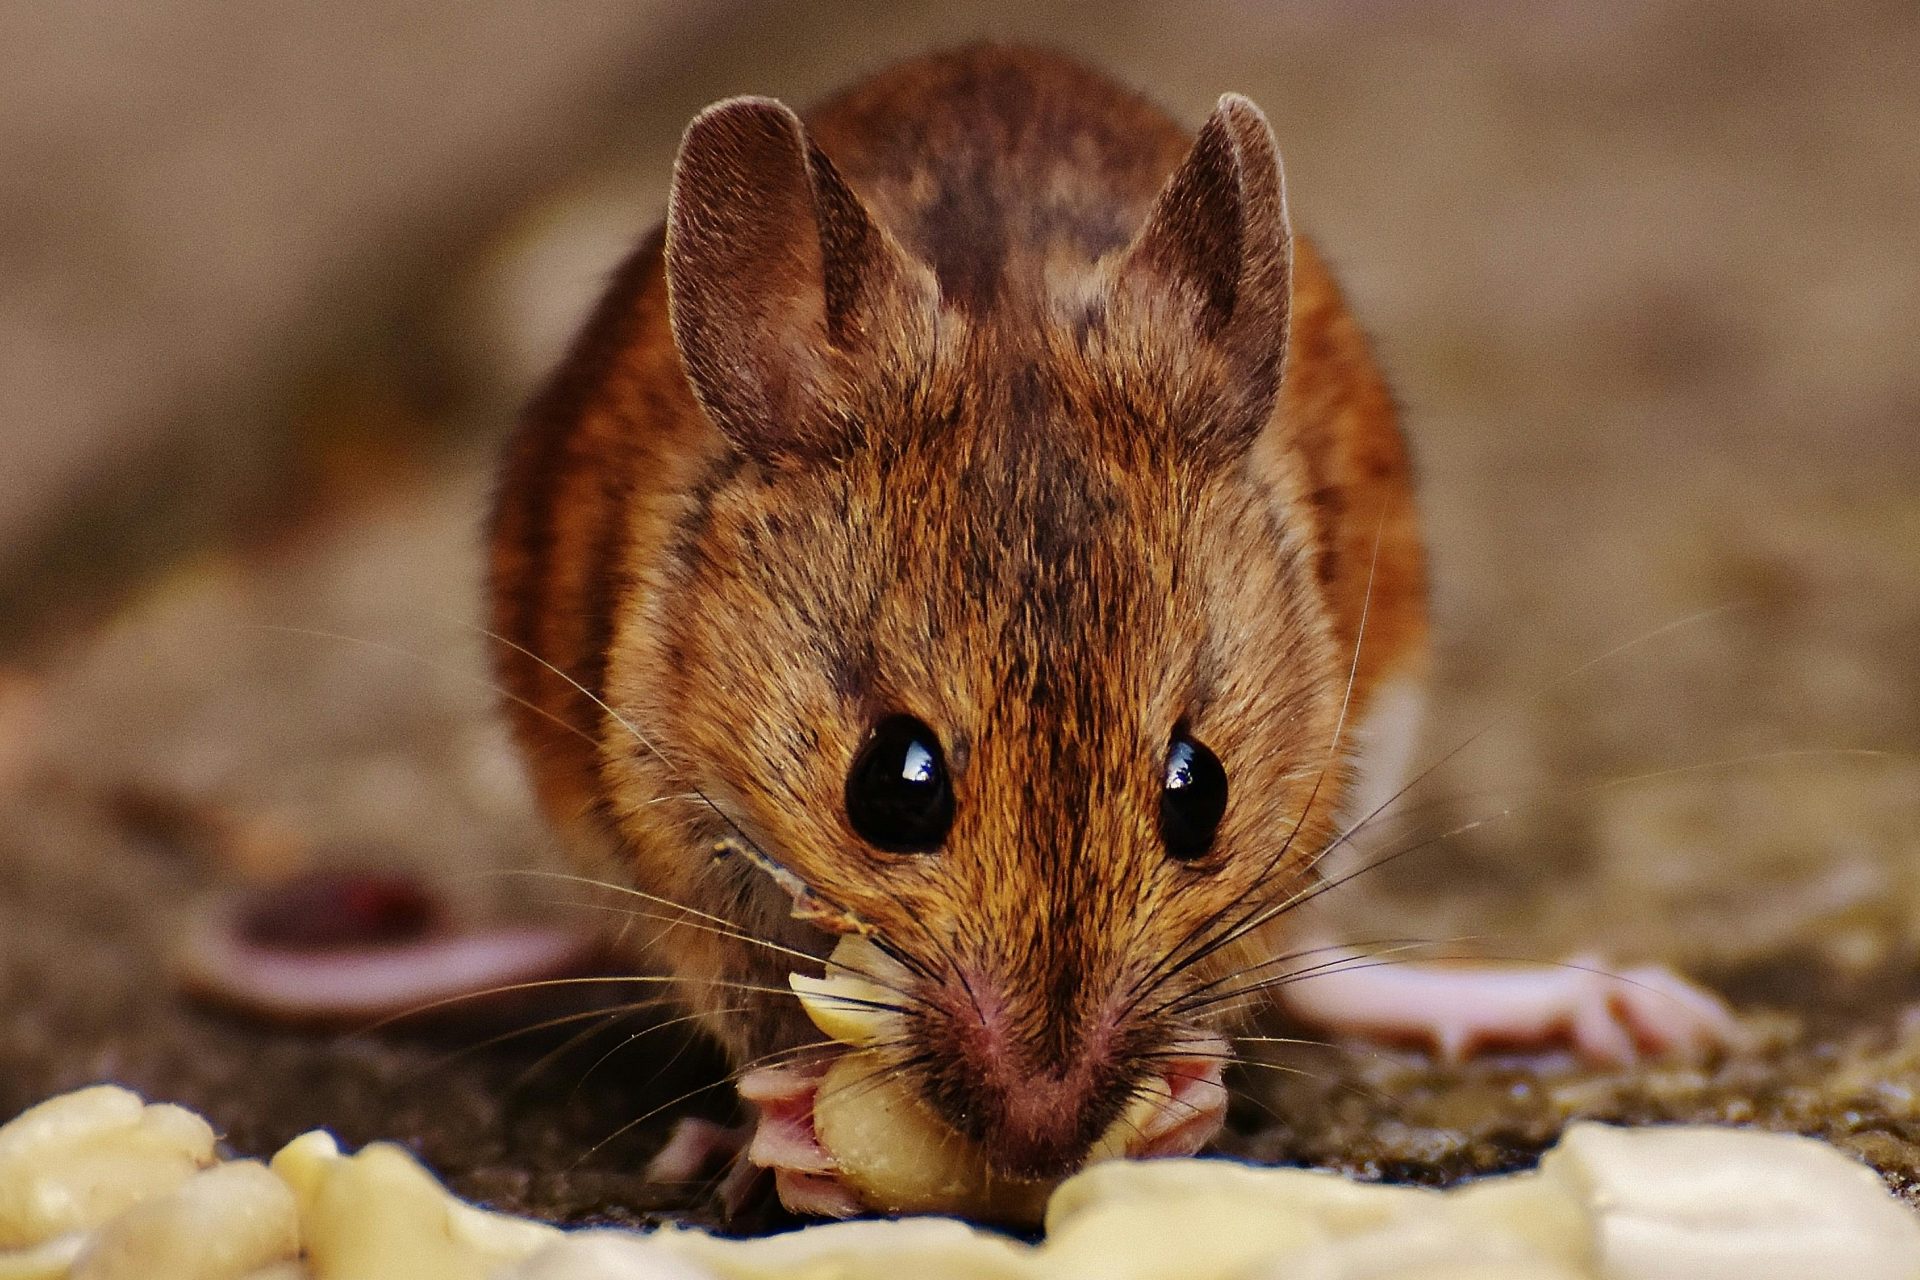 Poisoned rats: a major challenge for their survival